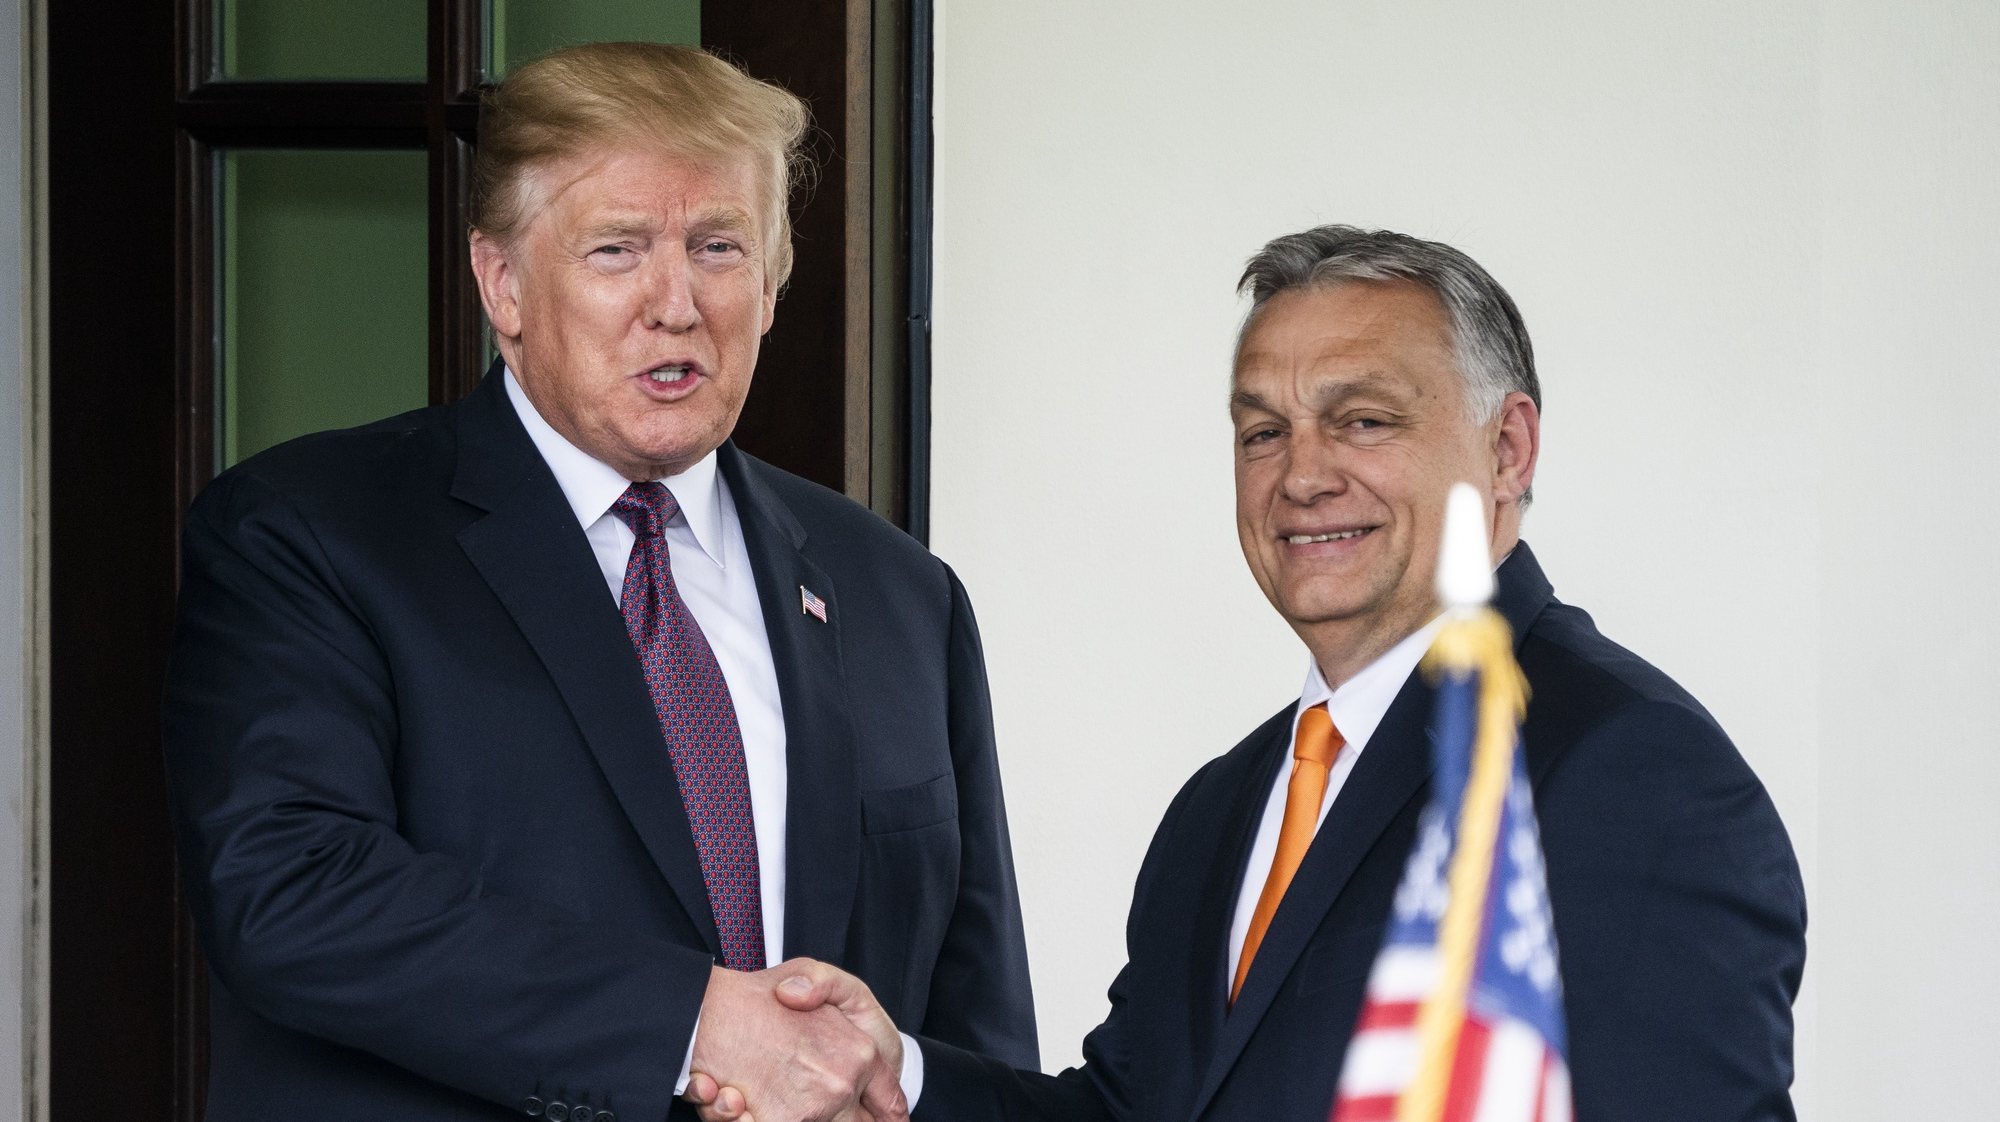 epaselect epa07567885 US President Donald J. Trump (L) welcomes Hungarian Prime Minister Viktor Orban (R) to the White House in Washington, DC, USA, 13 May 2019. Their meeting marks the first time a US president has granted Orban a formal visit in more than 20 years.  EPA/JIM LO SCALZO